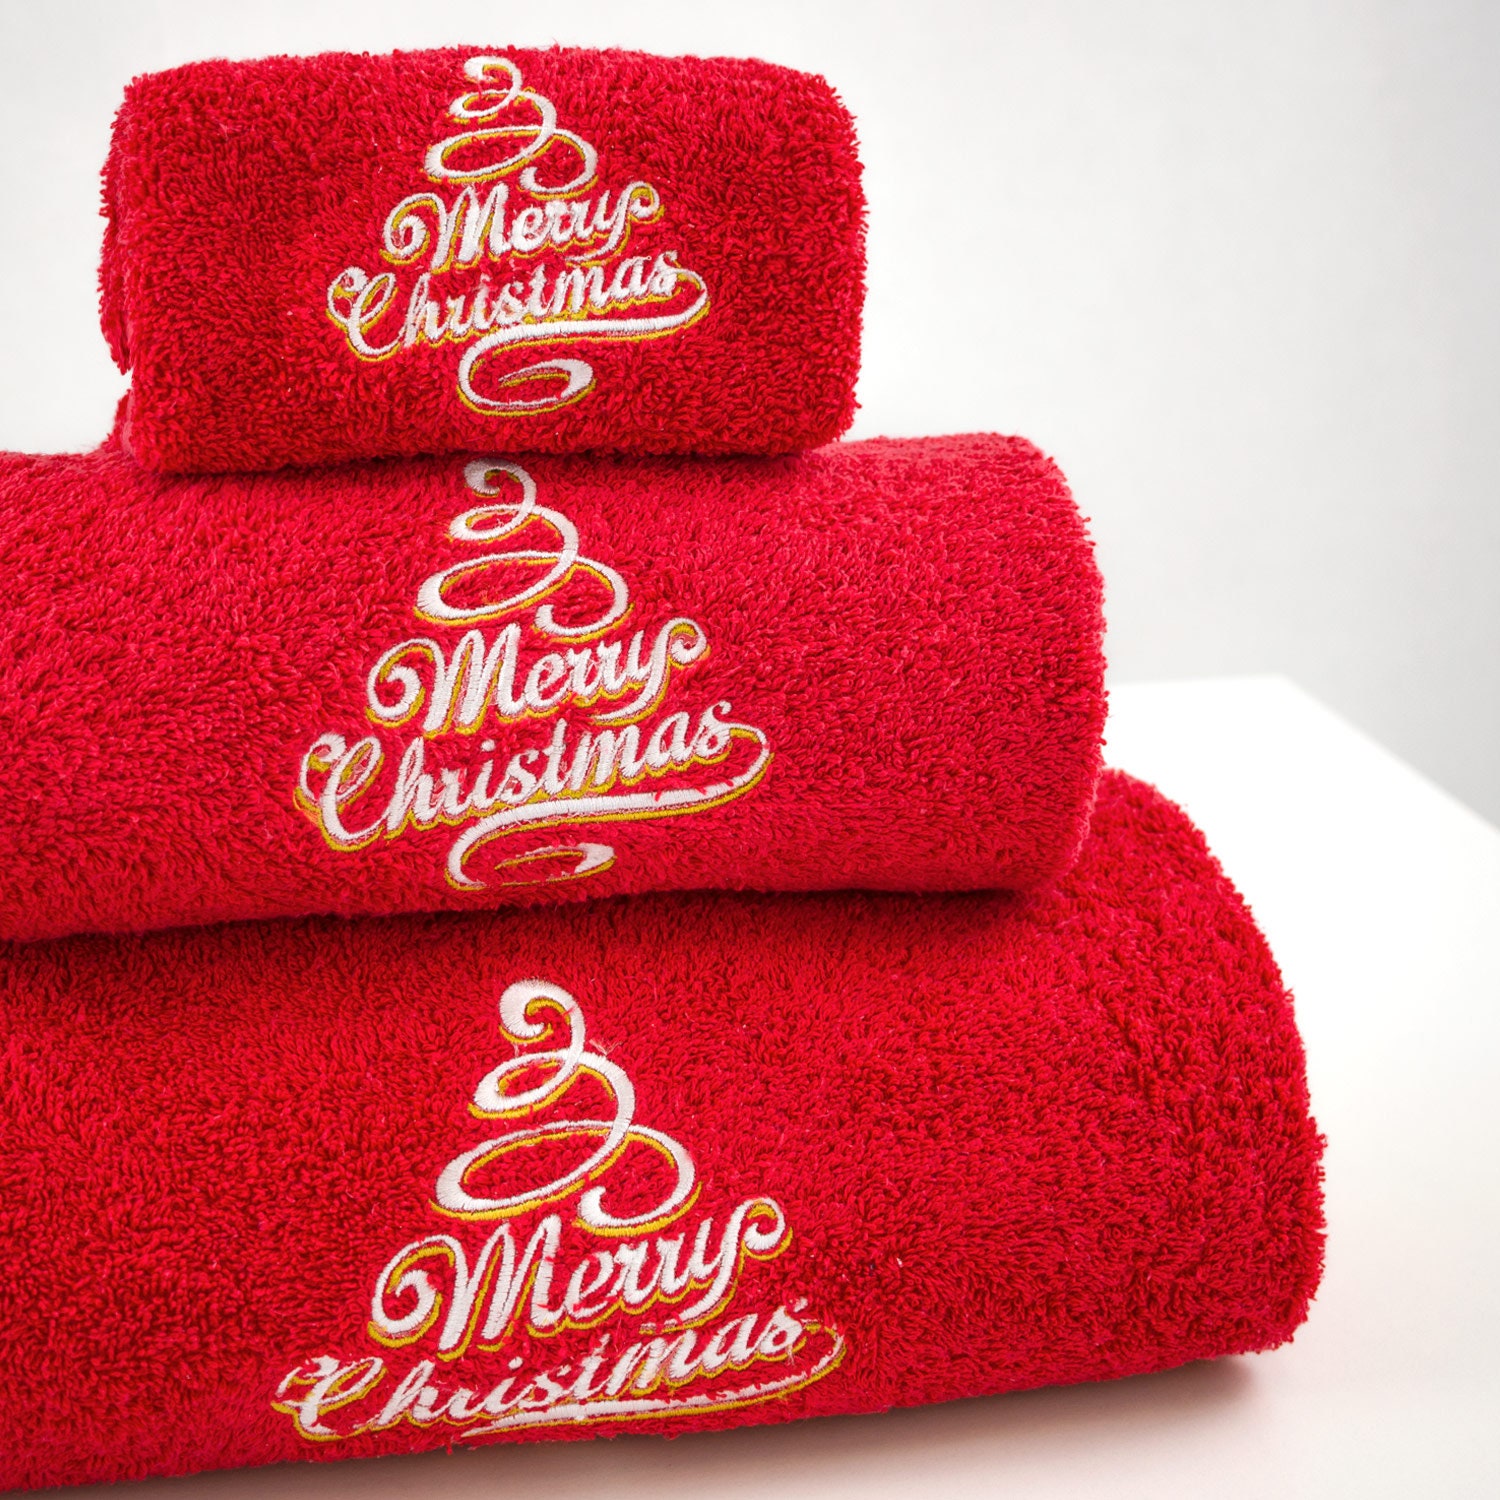 Merry Xmas Set of 3 embroidered red bath towels Ref. Merry | Etsy